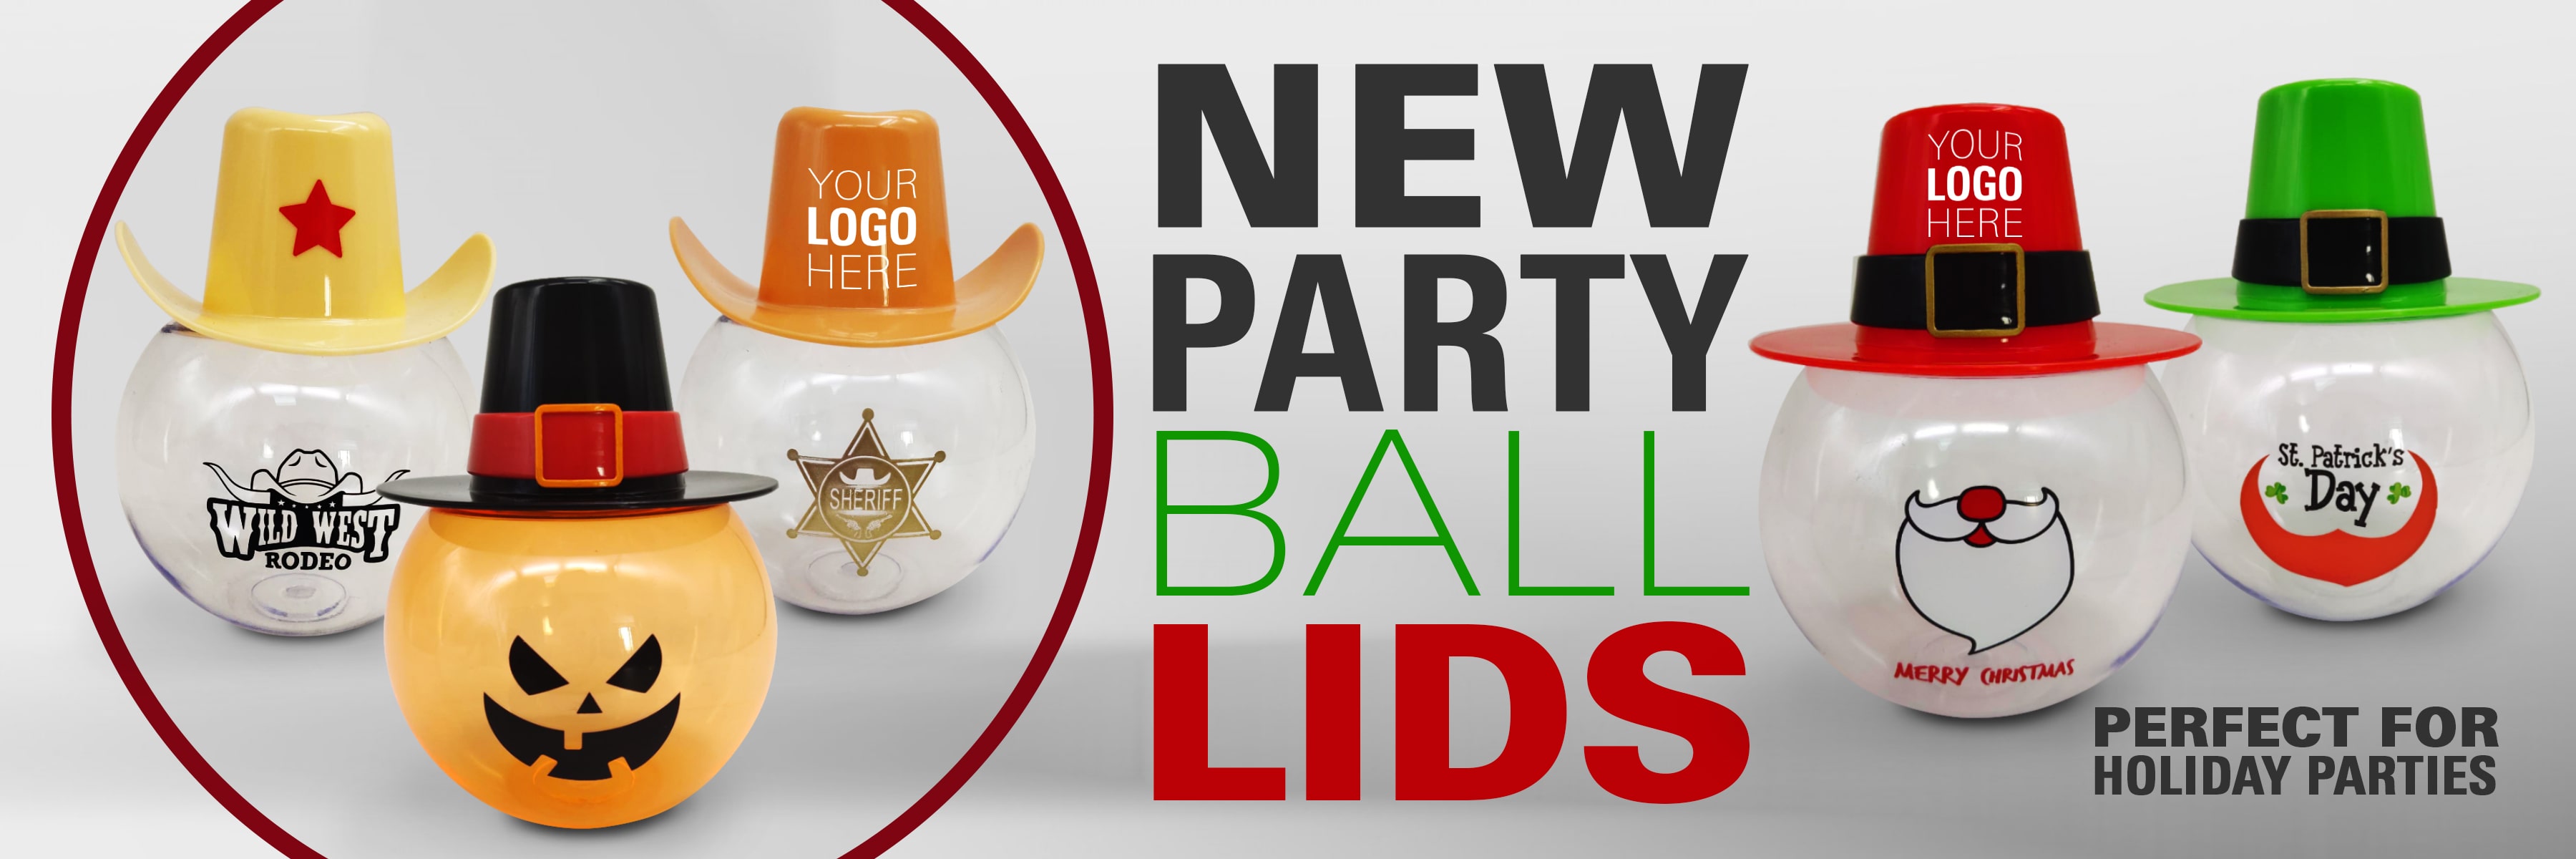 party ball lids